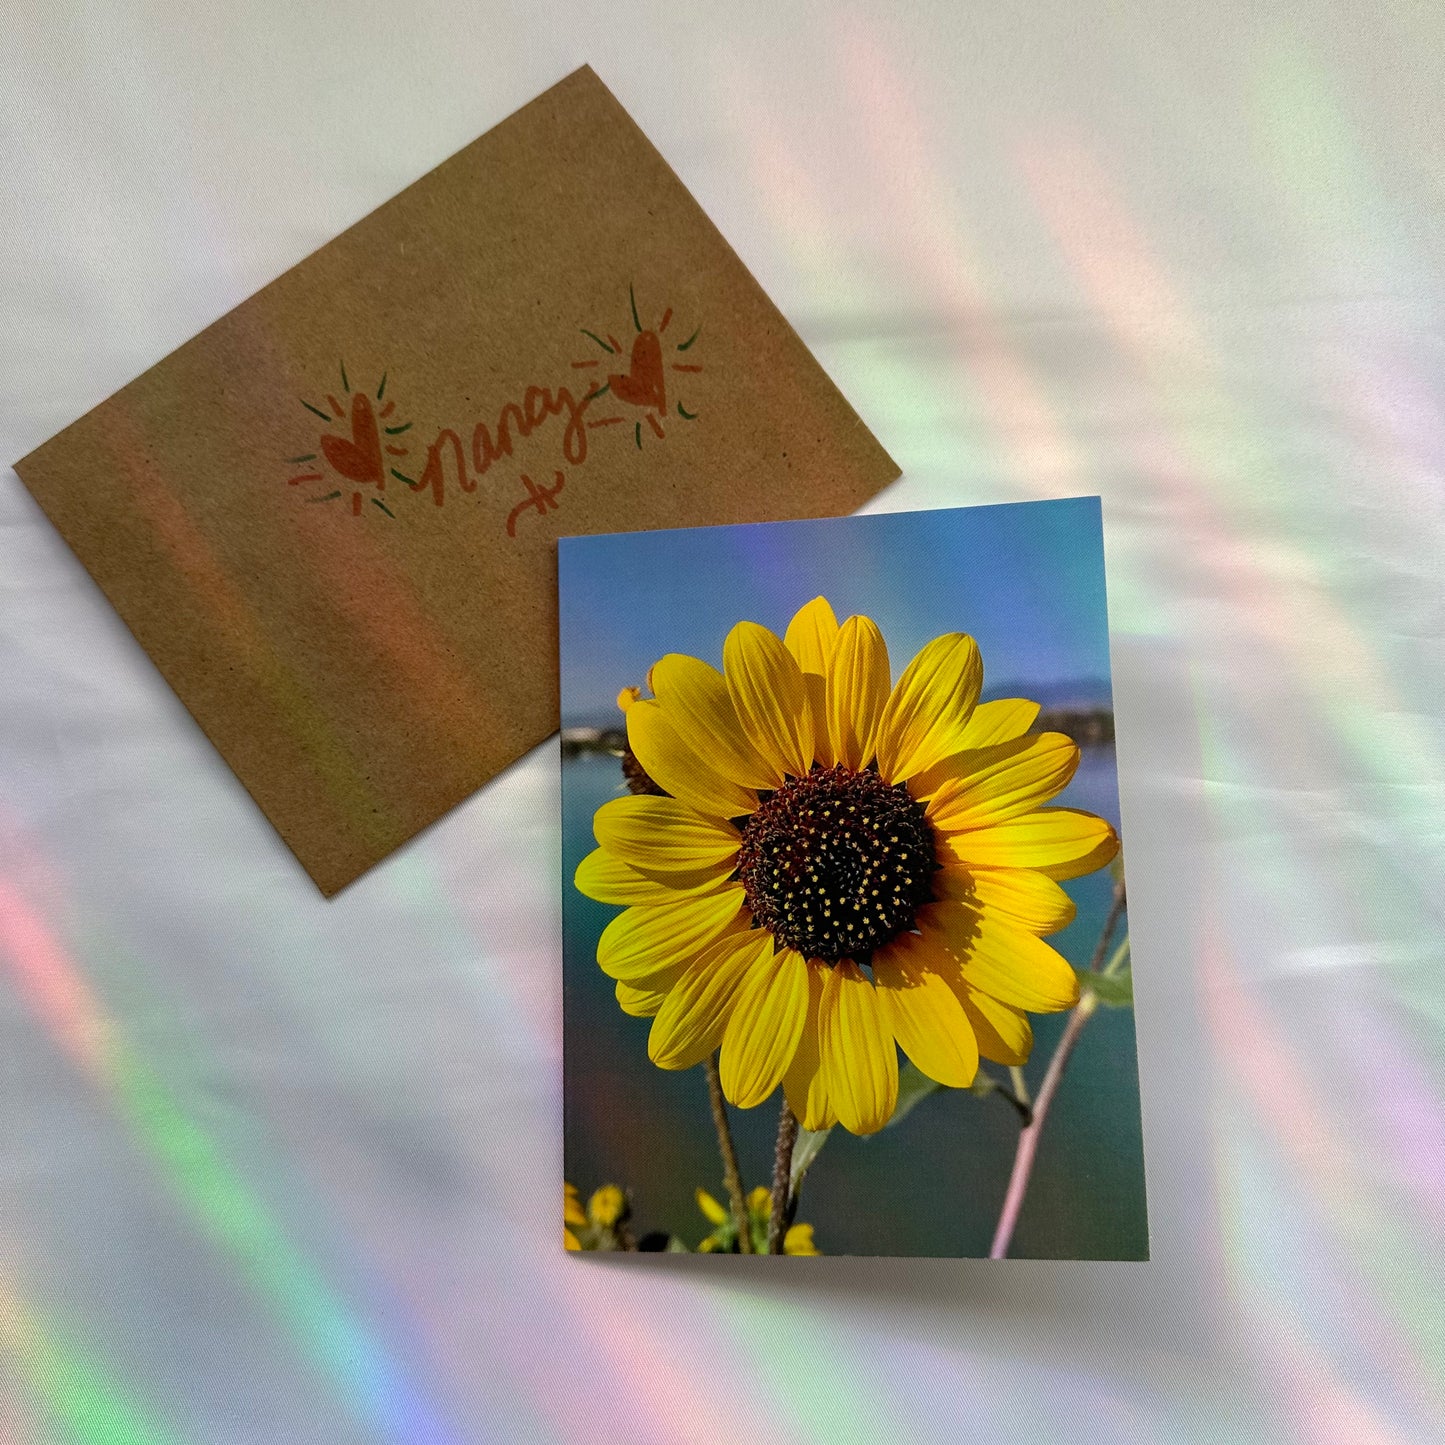 Handwritten Gift Message in a Mystery Greeting Card